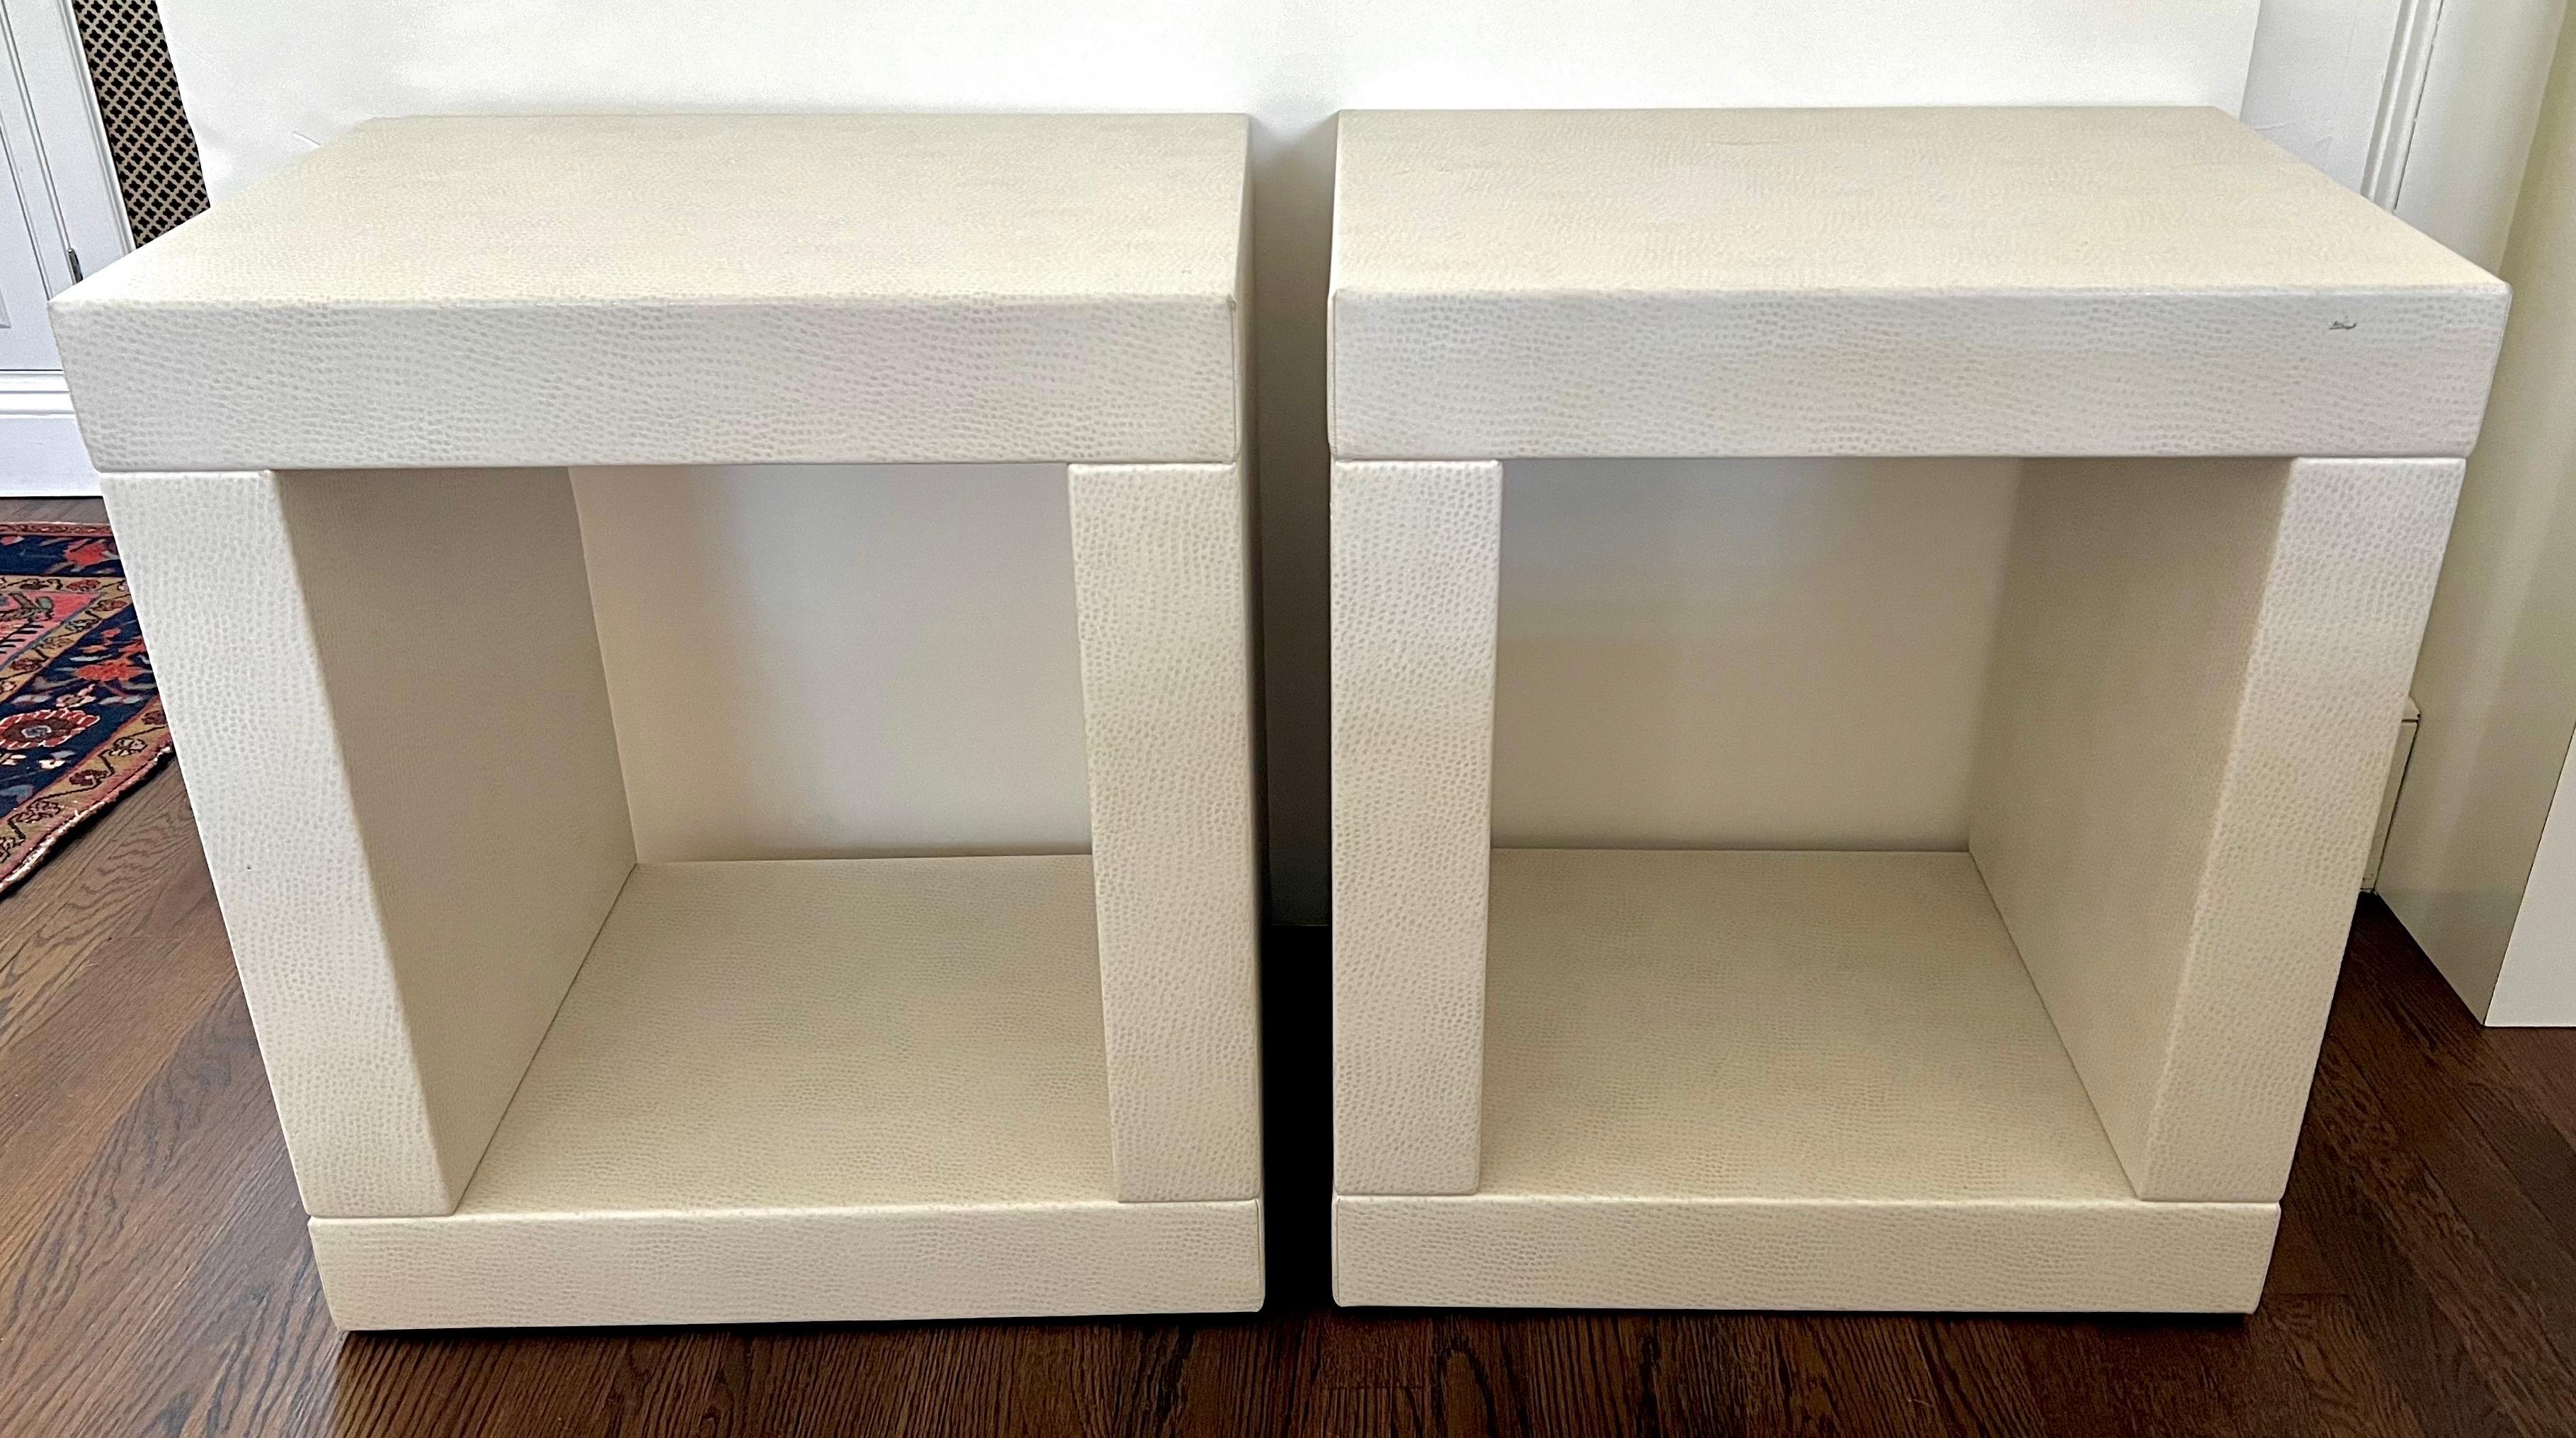 Unique contemporary Karl Springer style end tables or nightstands upholstered in a white faux snakeskin.